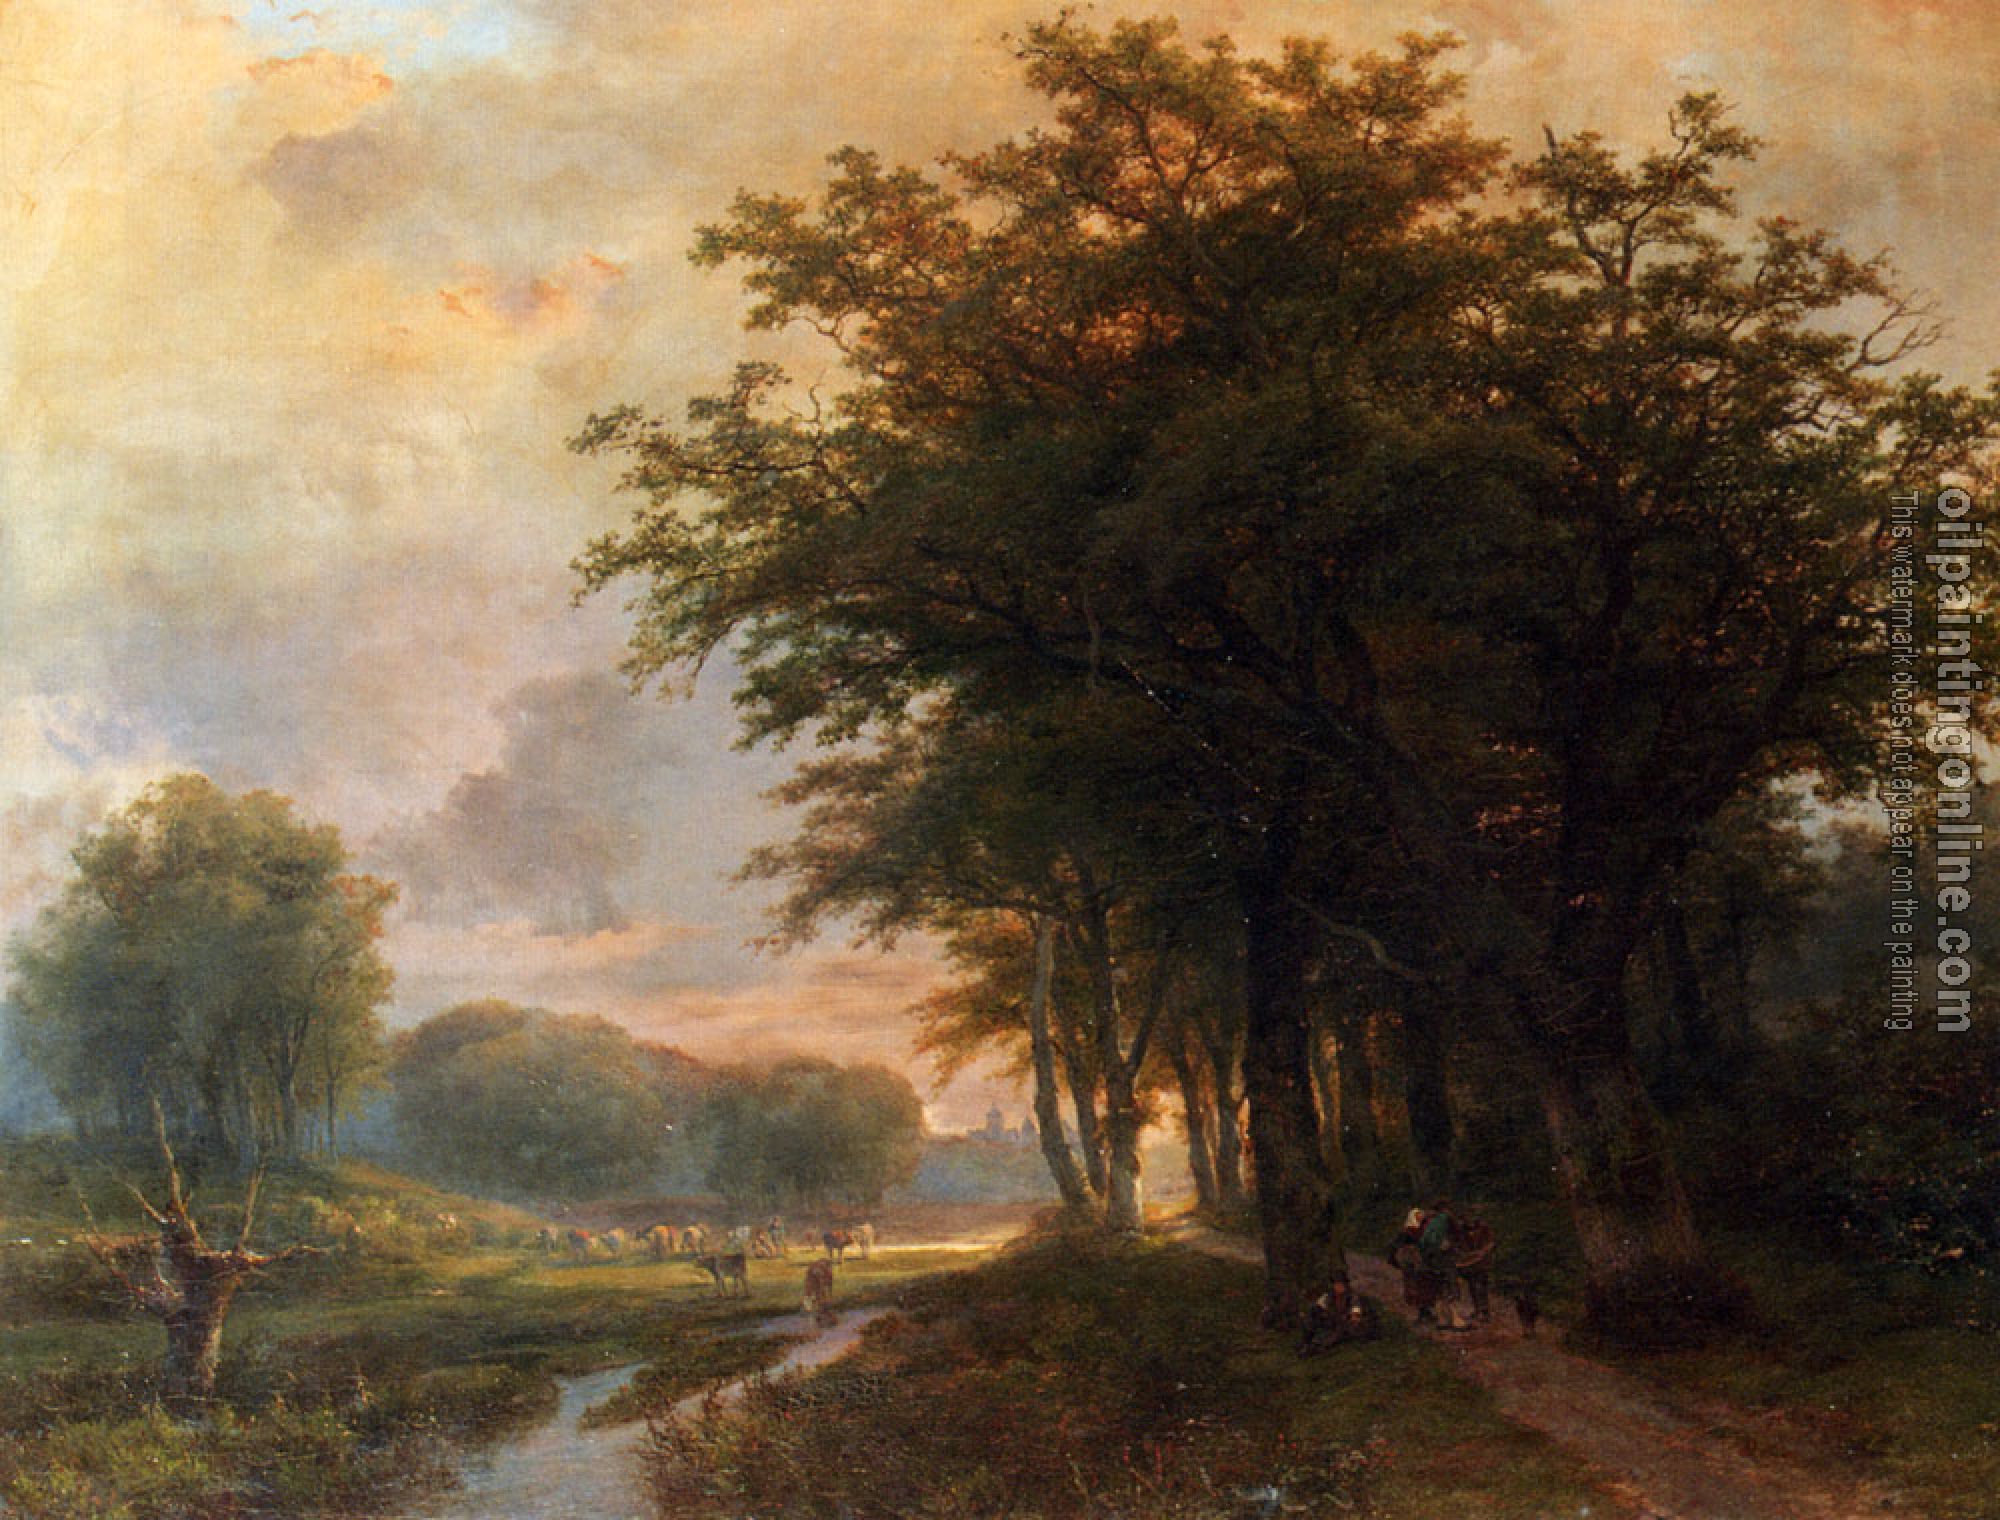 Johann Bernard Klombeck - A Wooded River Valley With Peasants On A Path